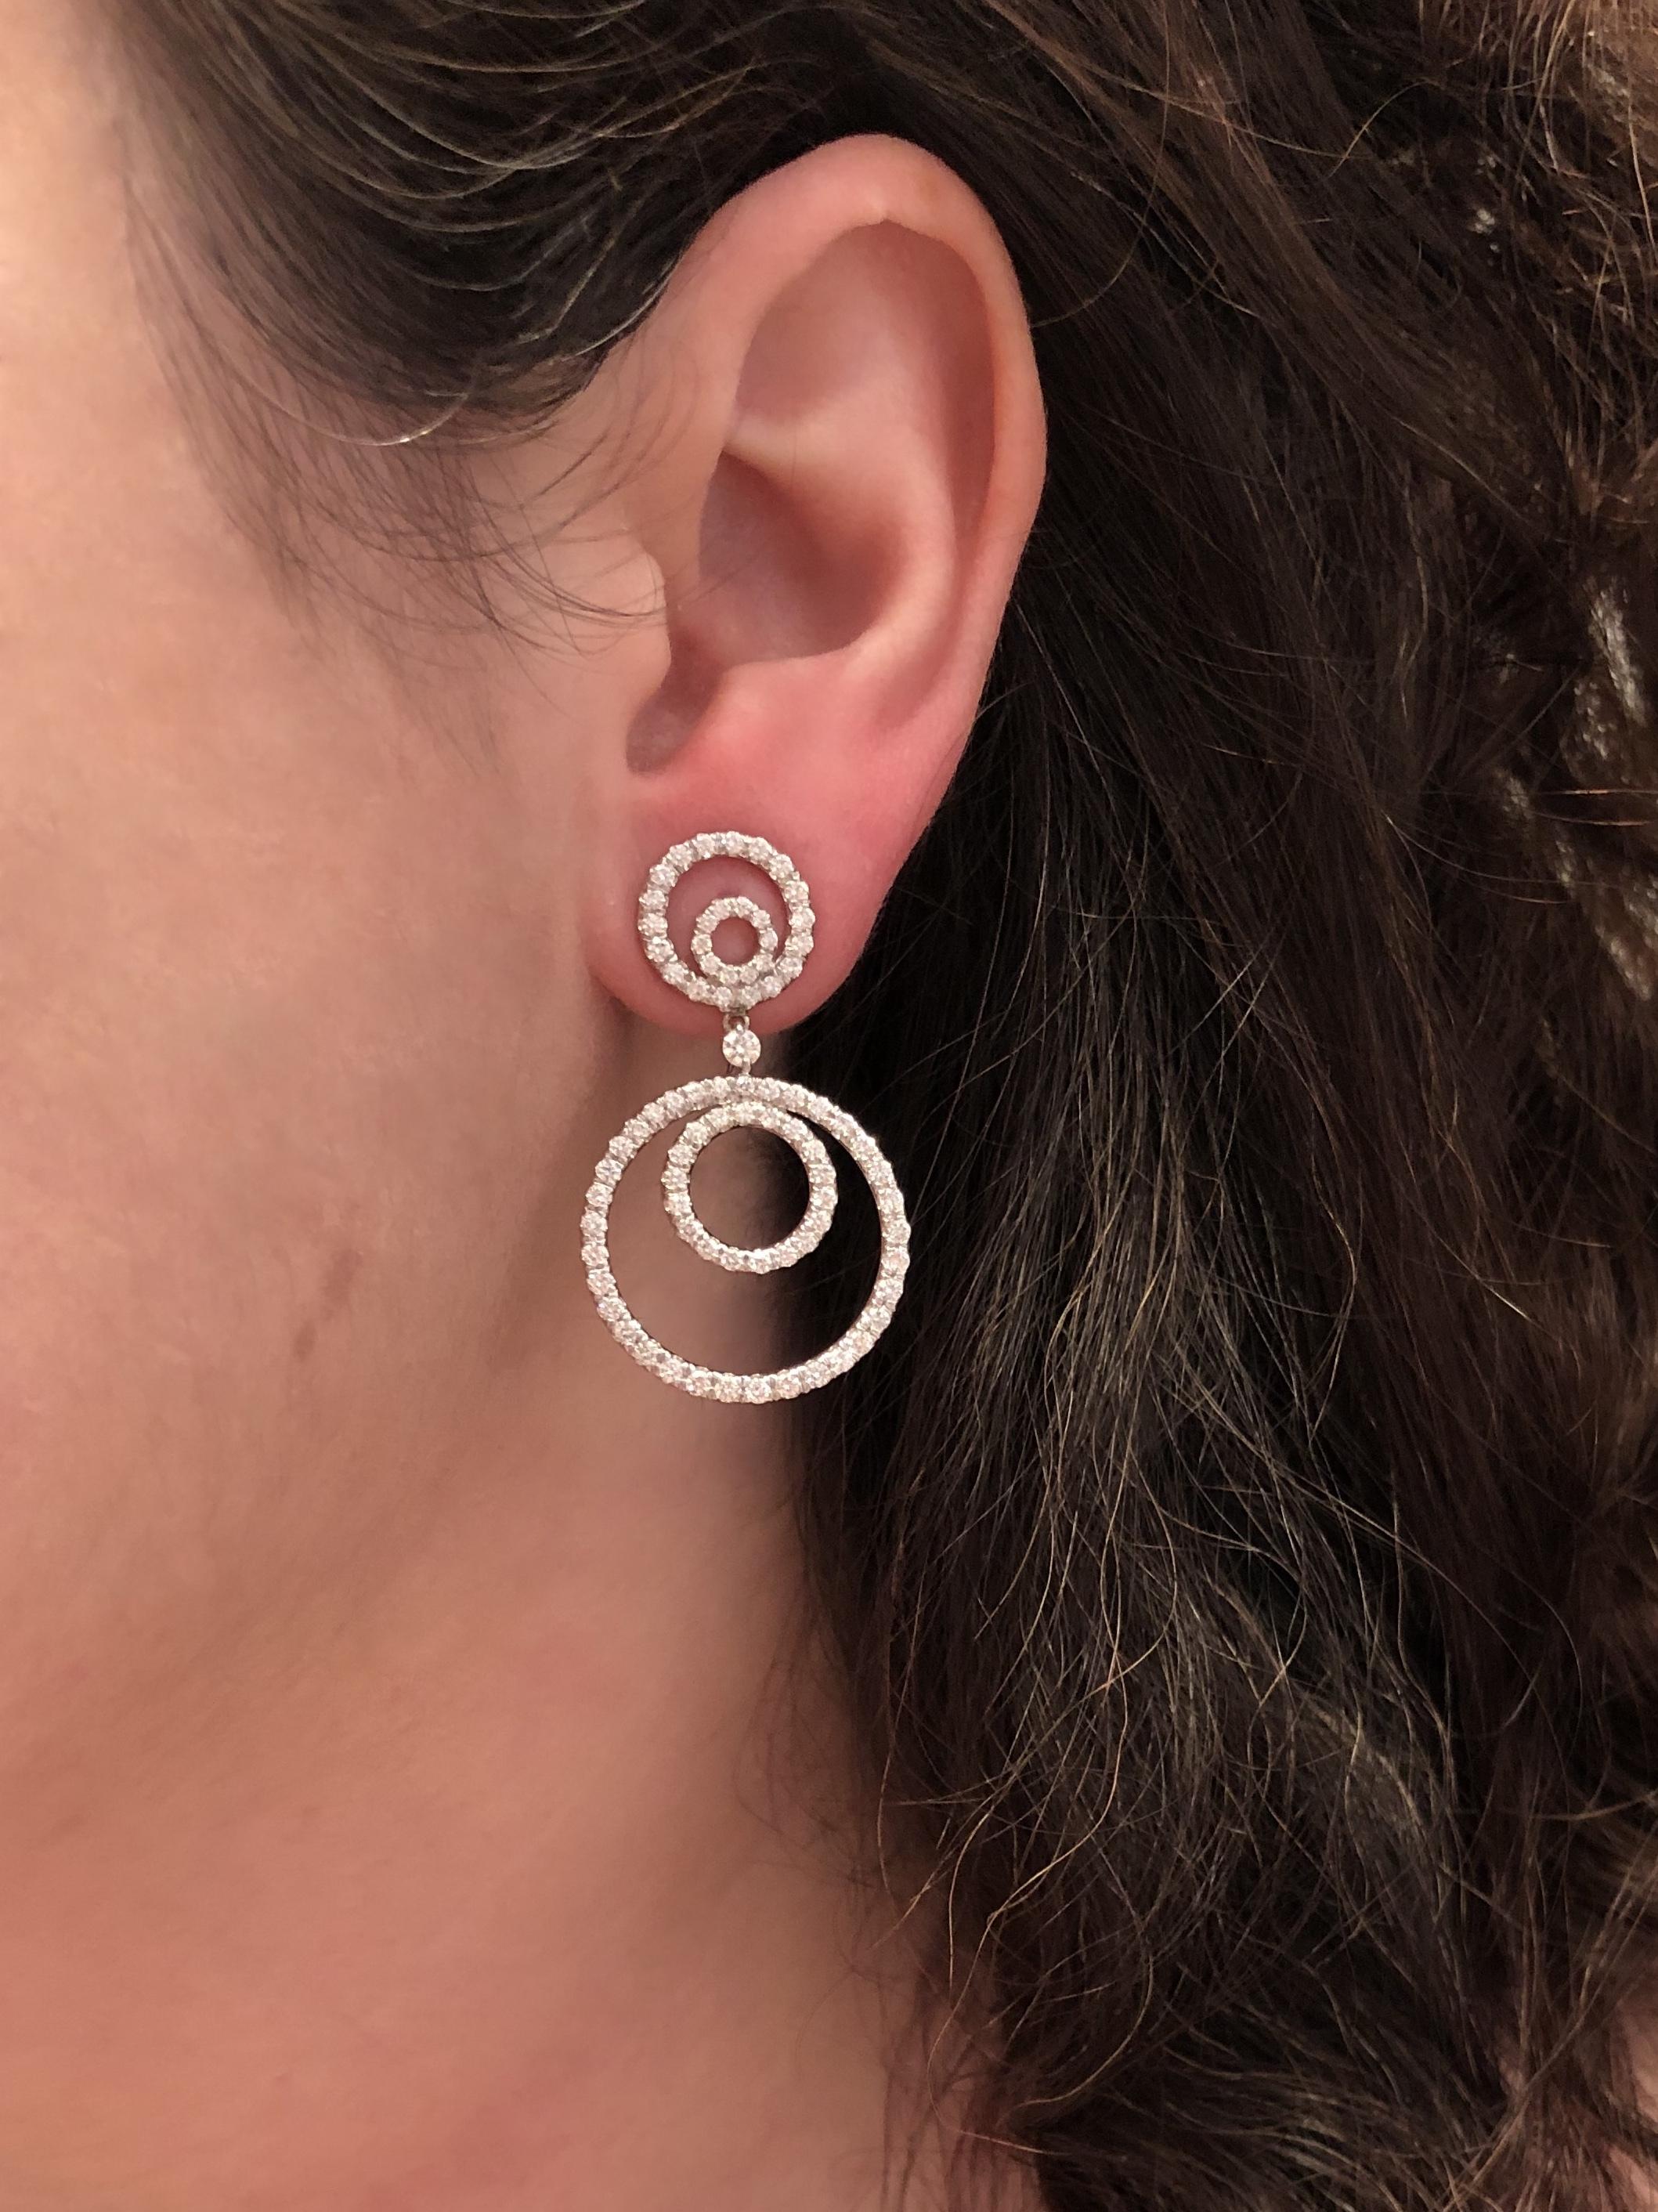 18k White Gold Diamond Pendant Earrings, Signed Kwiat

These diamond earrings are from the Contorno Collection with 162 round brilliant diamonds totaling 2.56 carats, FG/VS@ mounted in 18k white gold.  The original retail was $12,100

Since 1907,